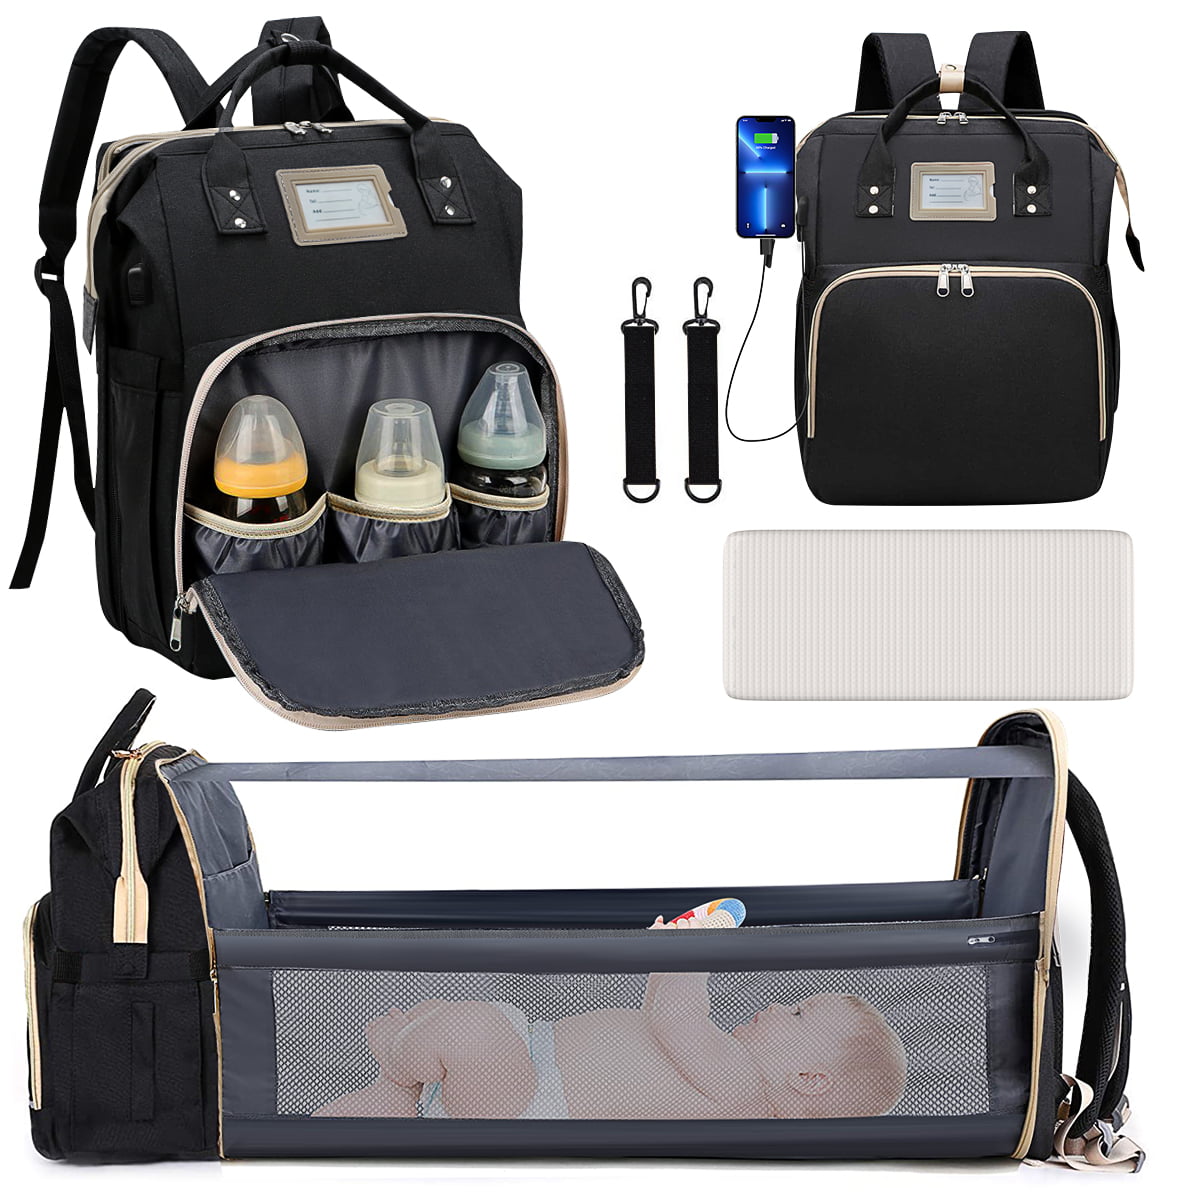 GPED Multifunctional Diaper Bag Backpack/Changing Bag with Foldable Crib & Insulated Milk Bottle Pocket